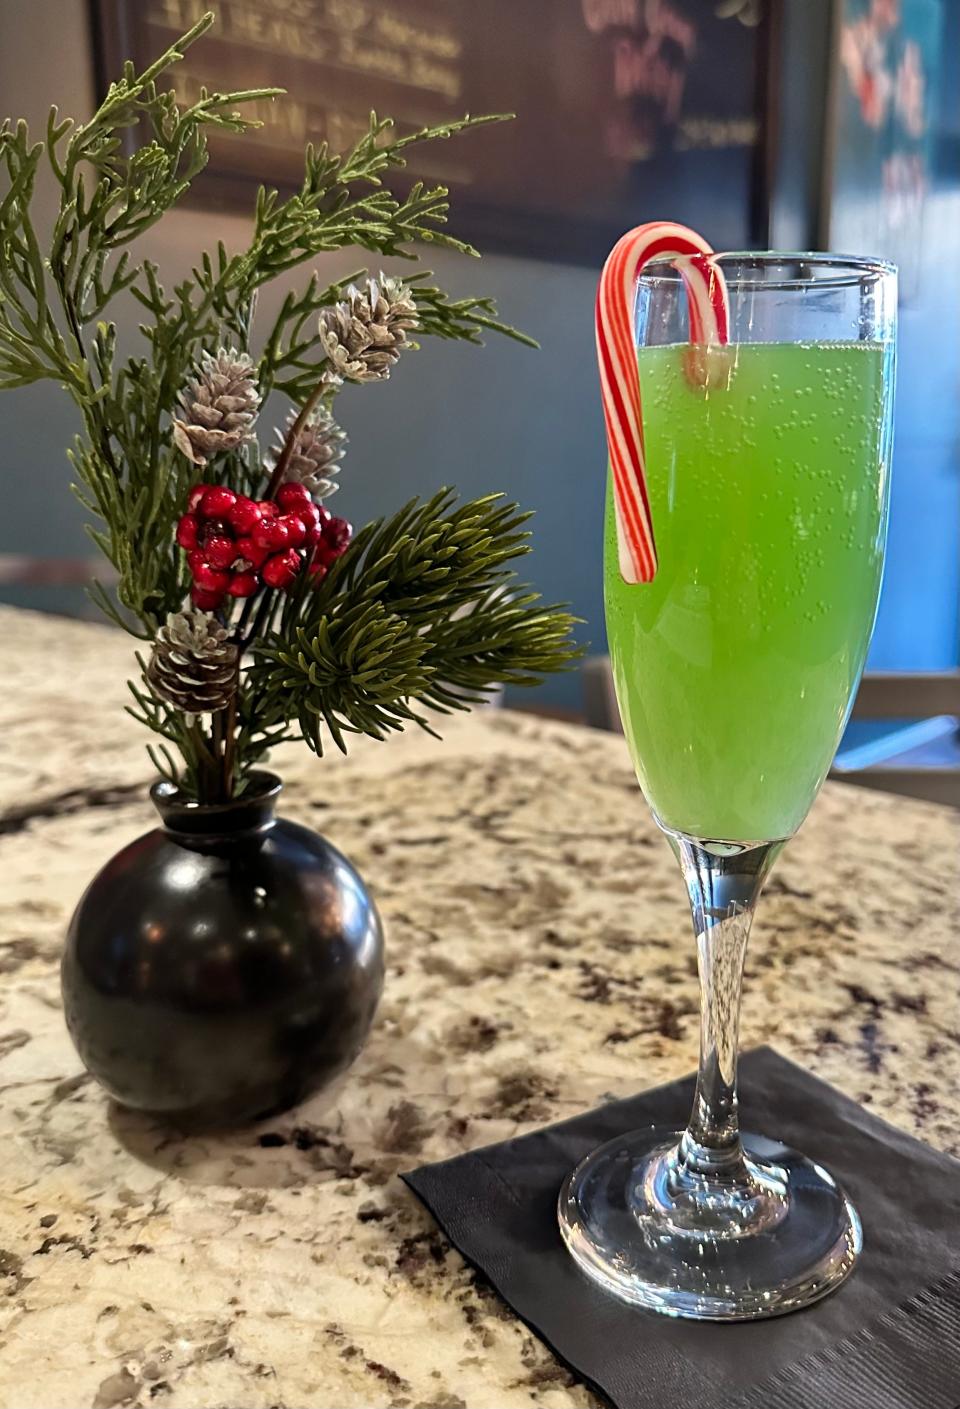 Get your Grinch on with this holiday bellini at Fronimo's Downtown in Canton.